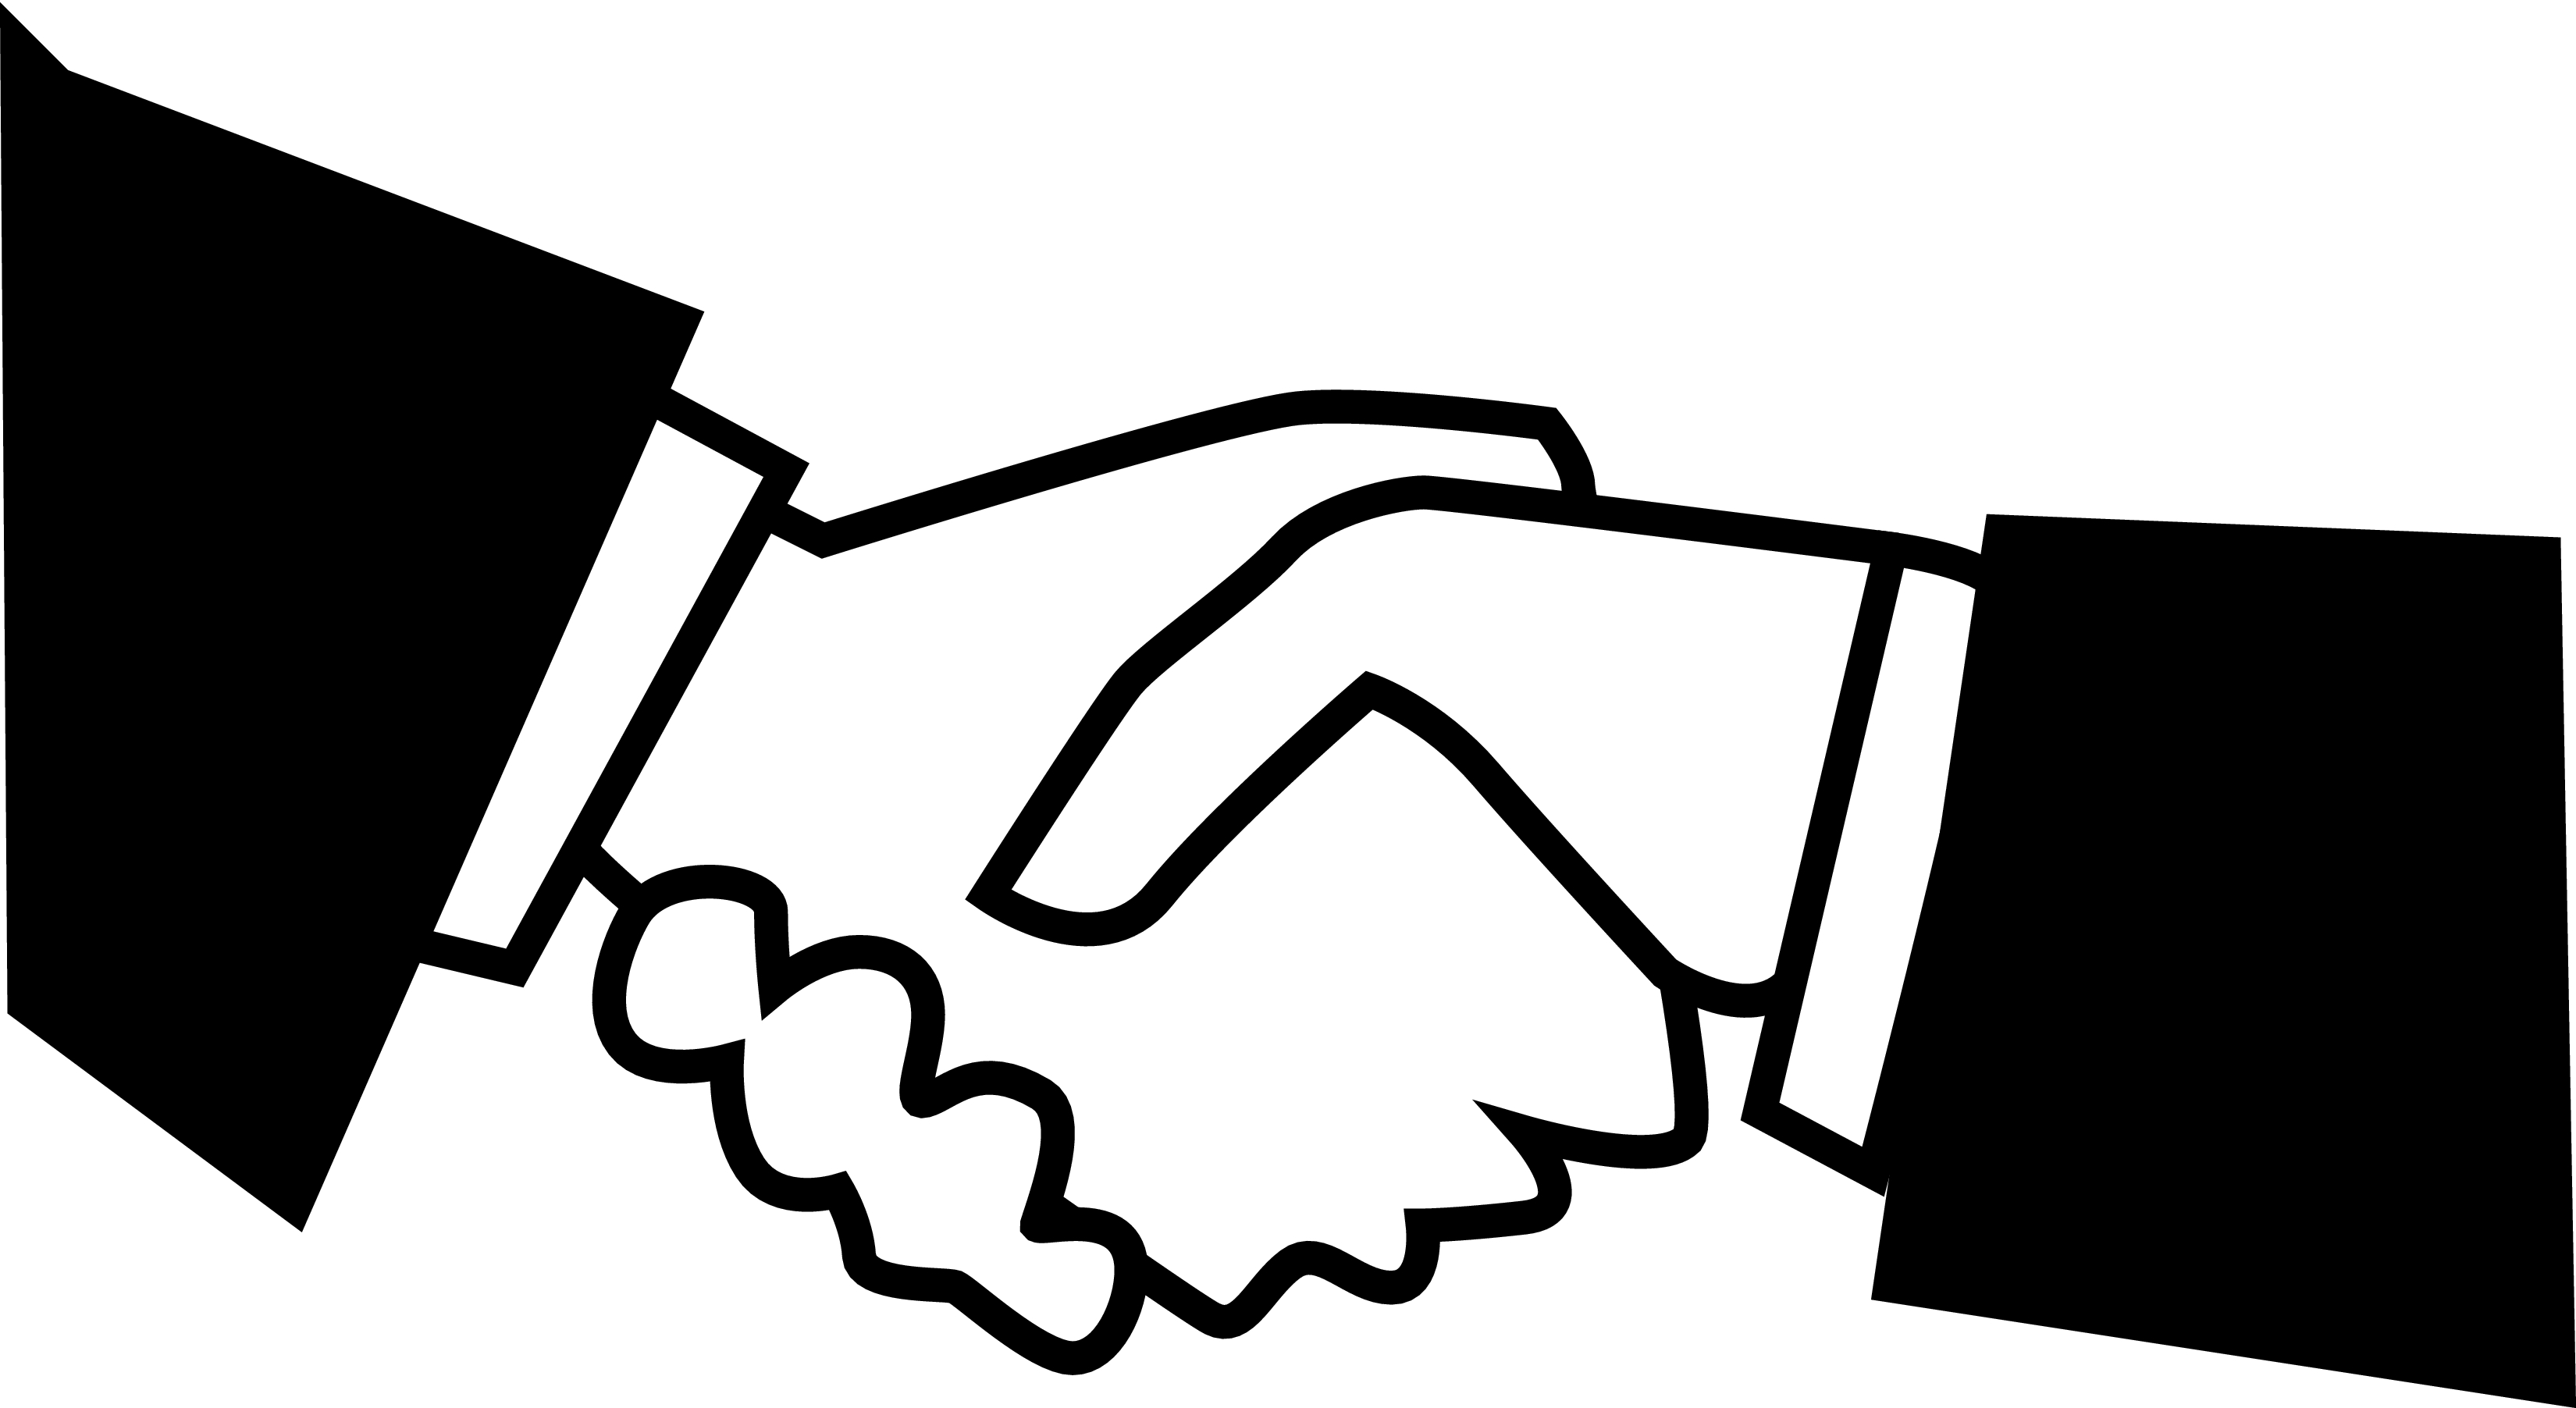 Holding Hands Clipart Black And White | Clipart library - Free 